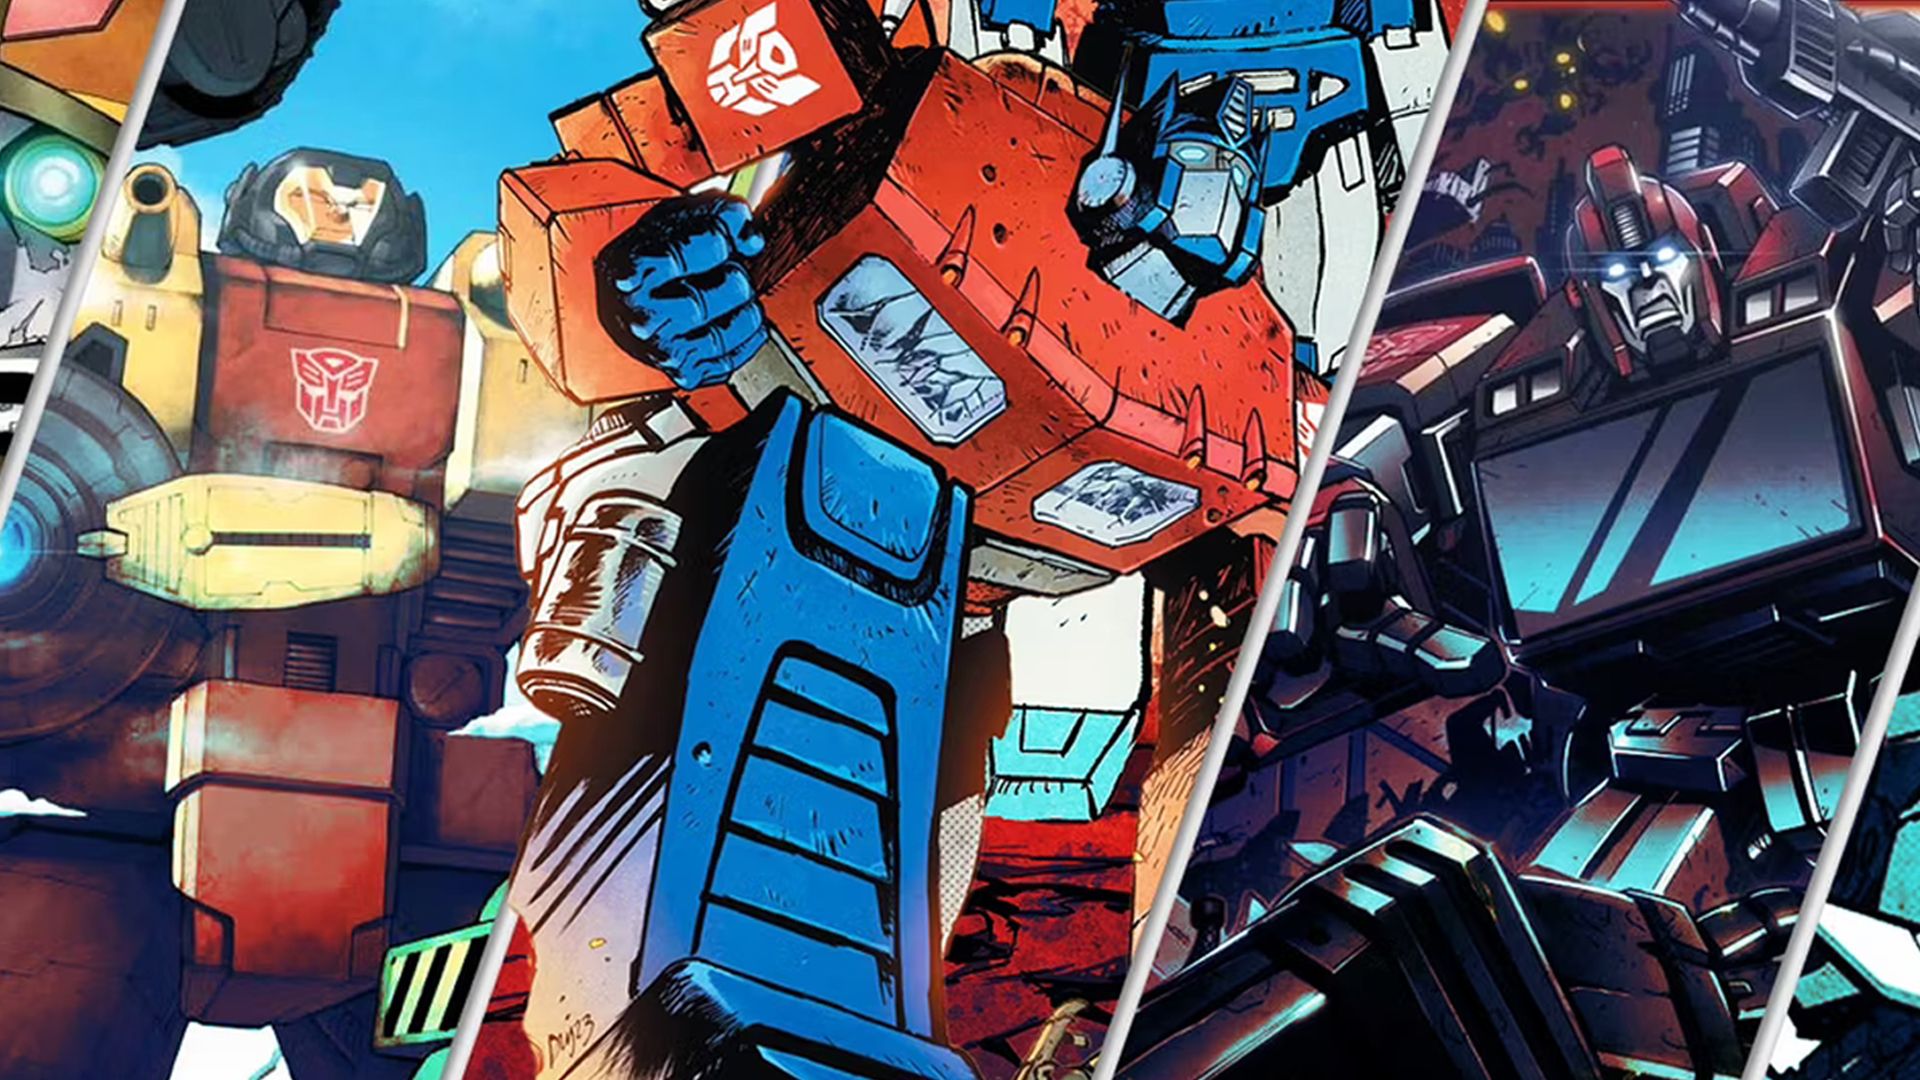 A split image of Optimus Prime leading Autobots into battle in the Transformers comics